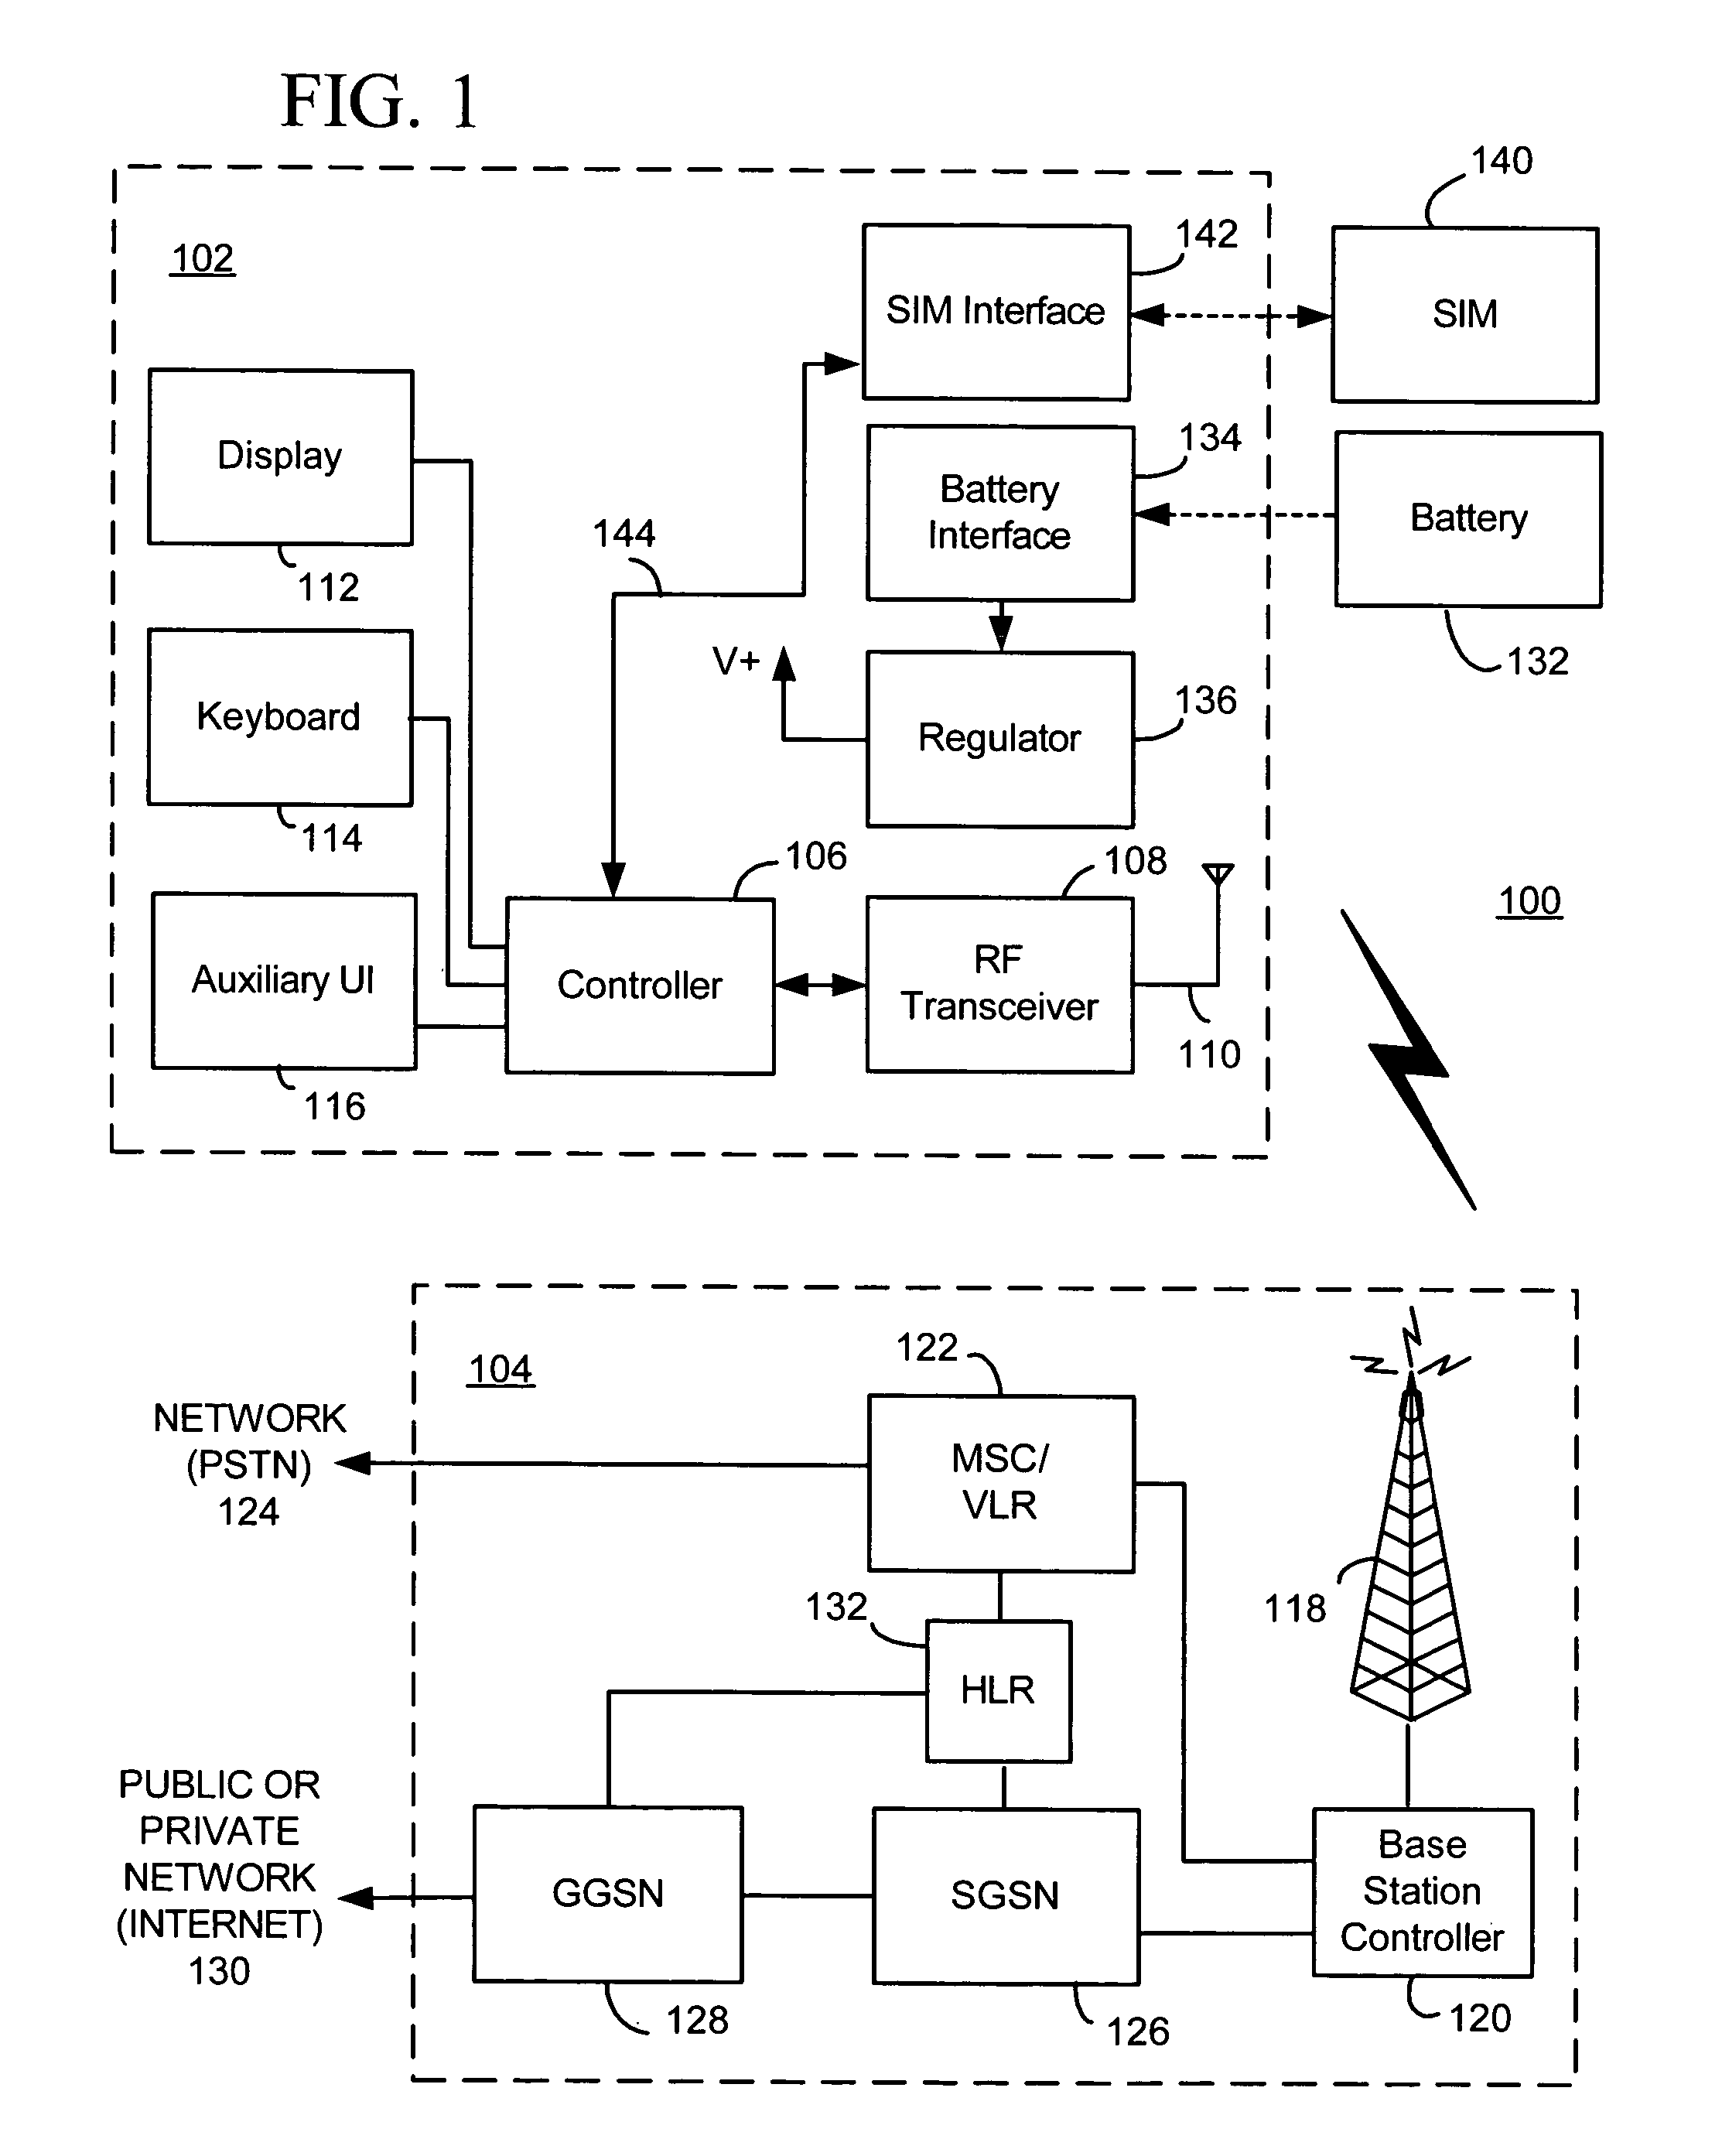 Automatic network selection methods and apparatus using a steered PLMN